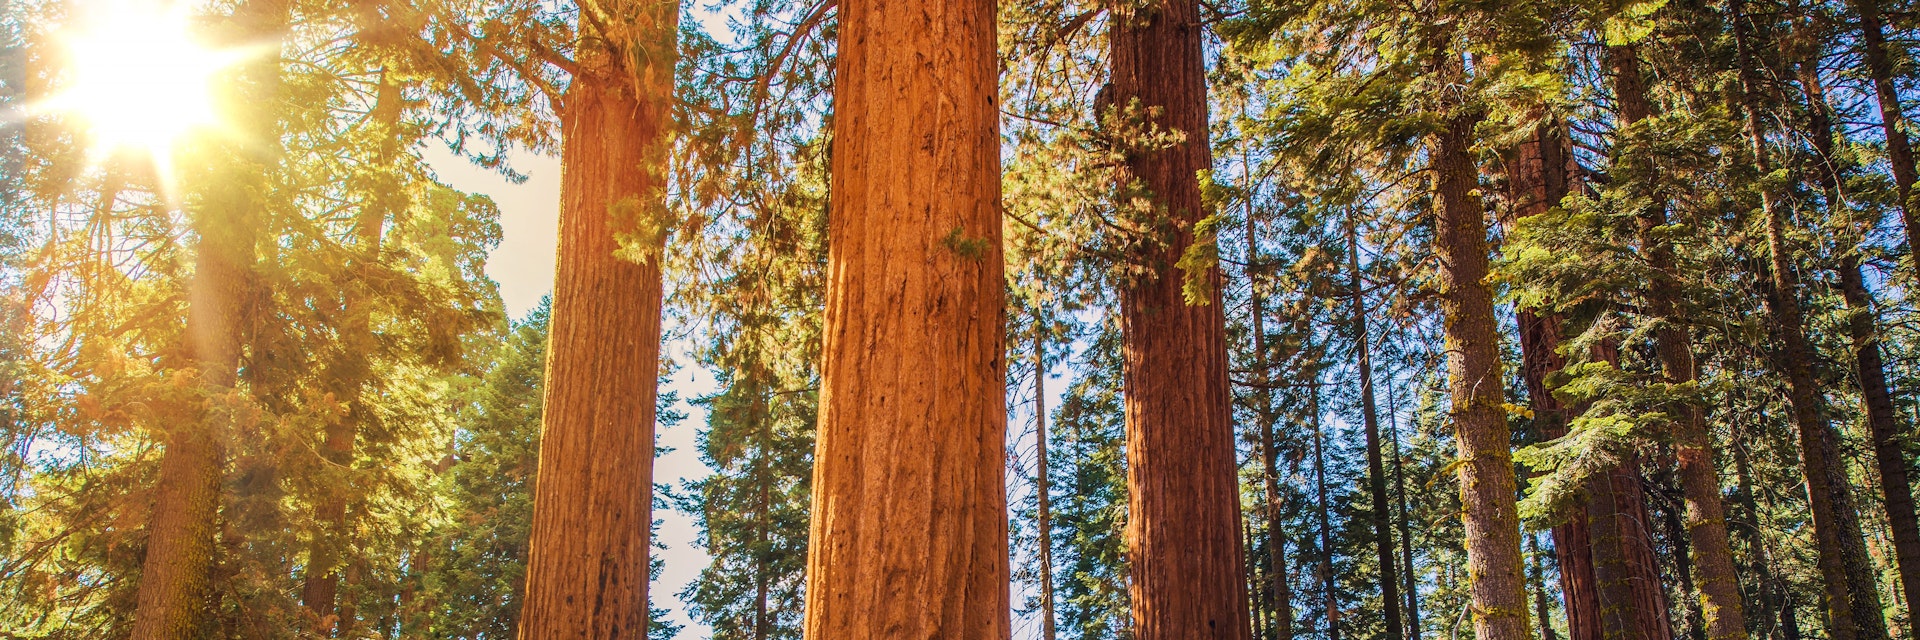 Man looking up at a giant redwood in Sequoia National Park.